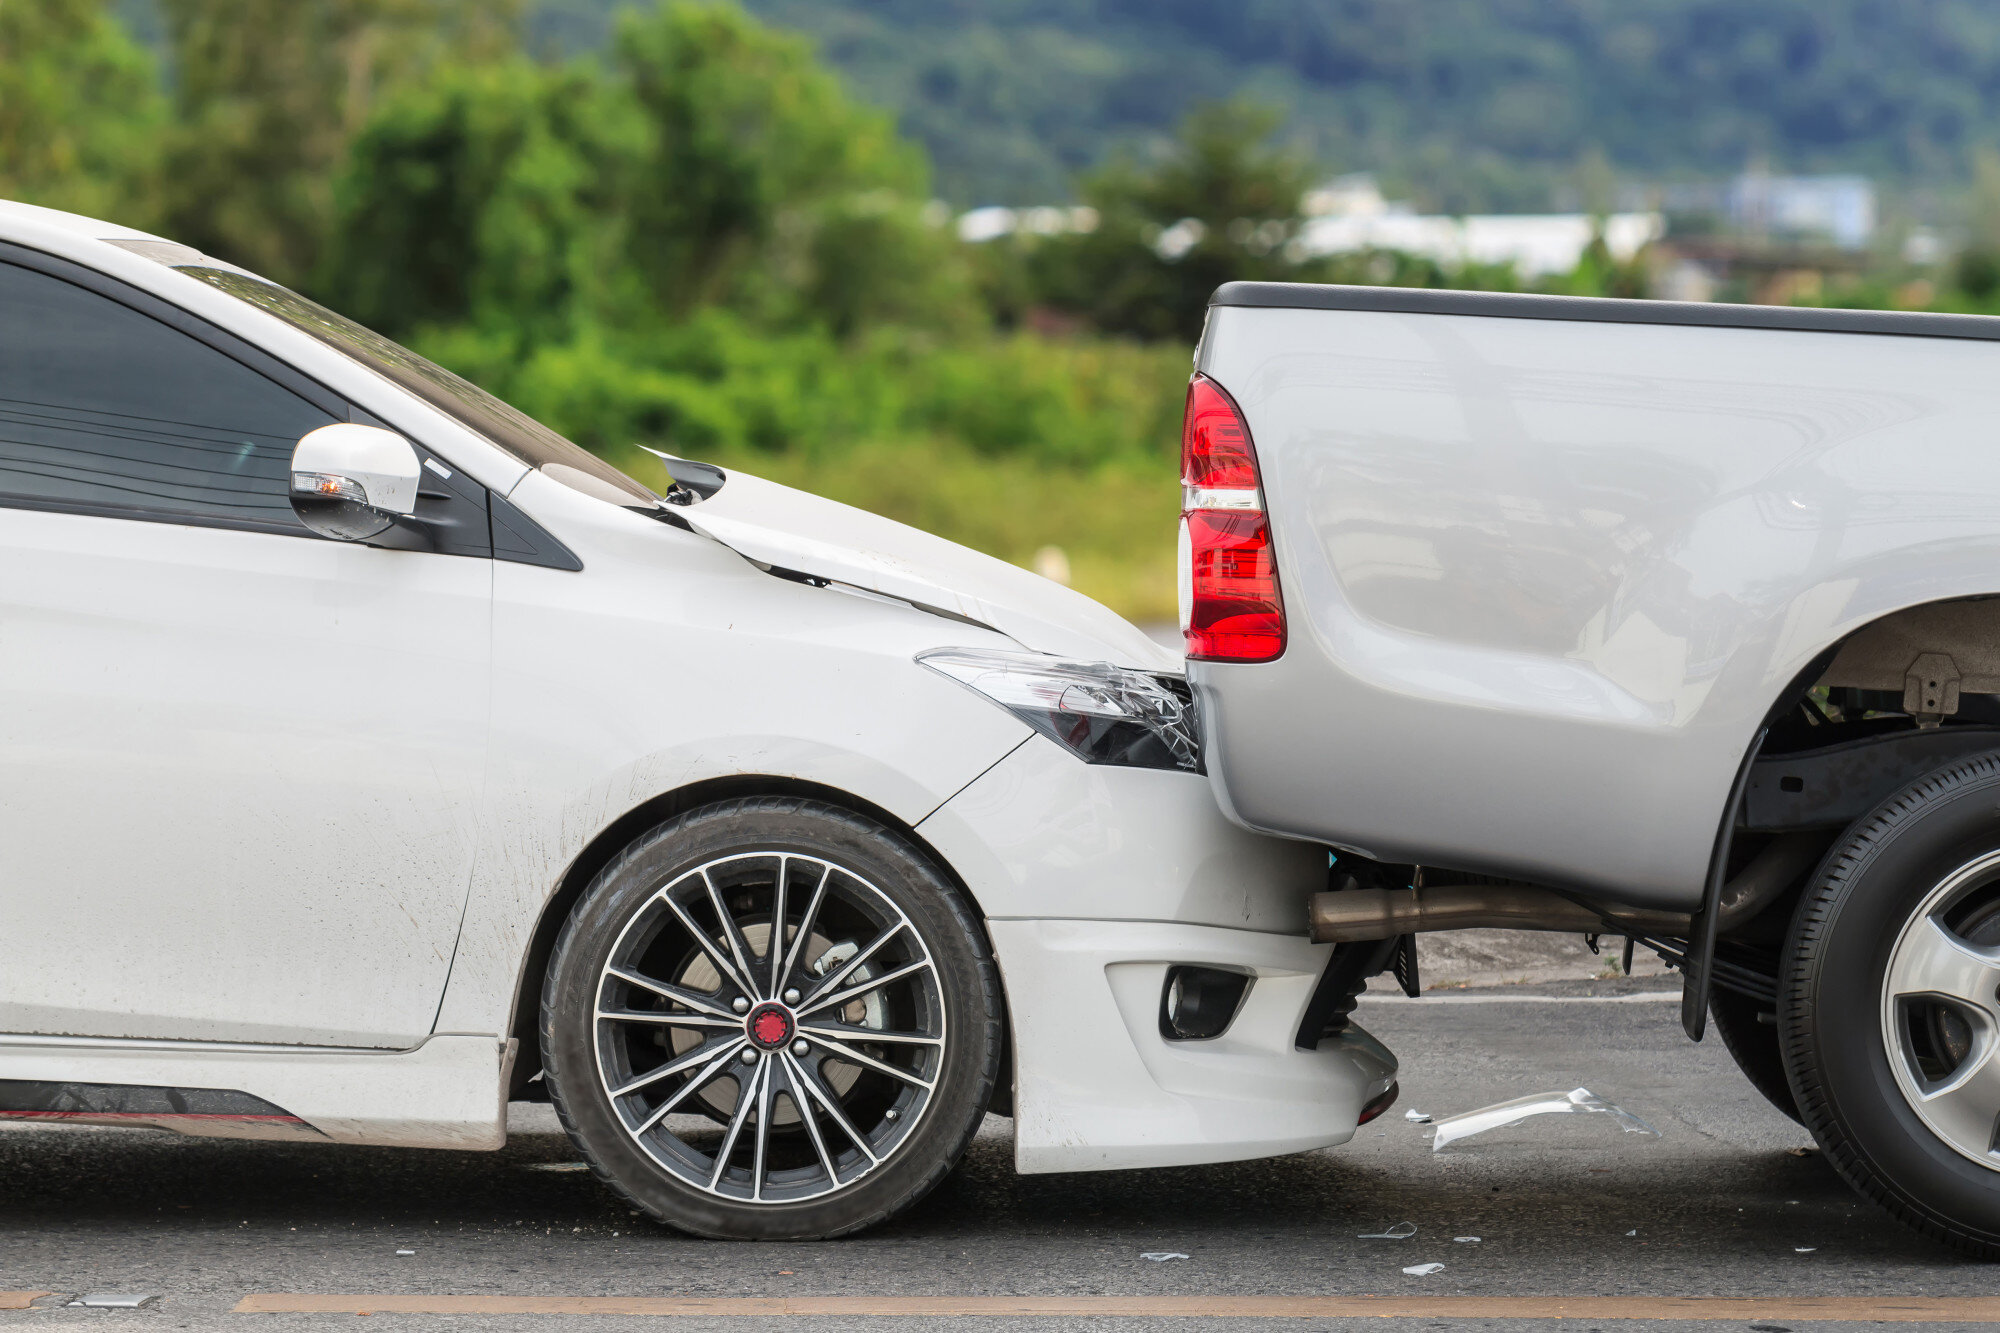 The Best Auto Insurance for High Risk Drivers